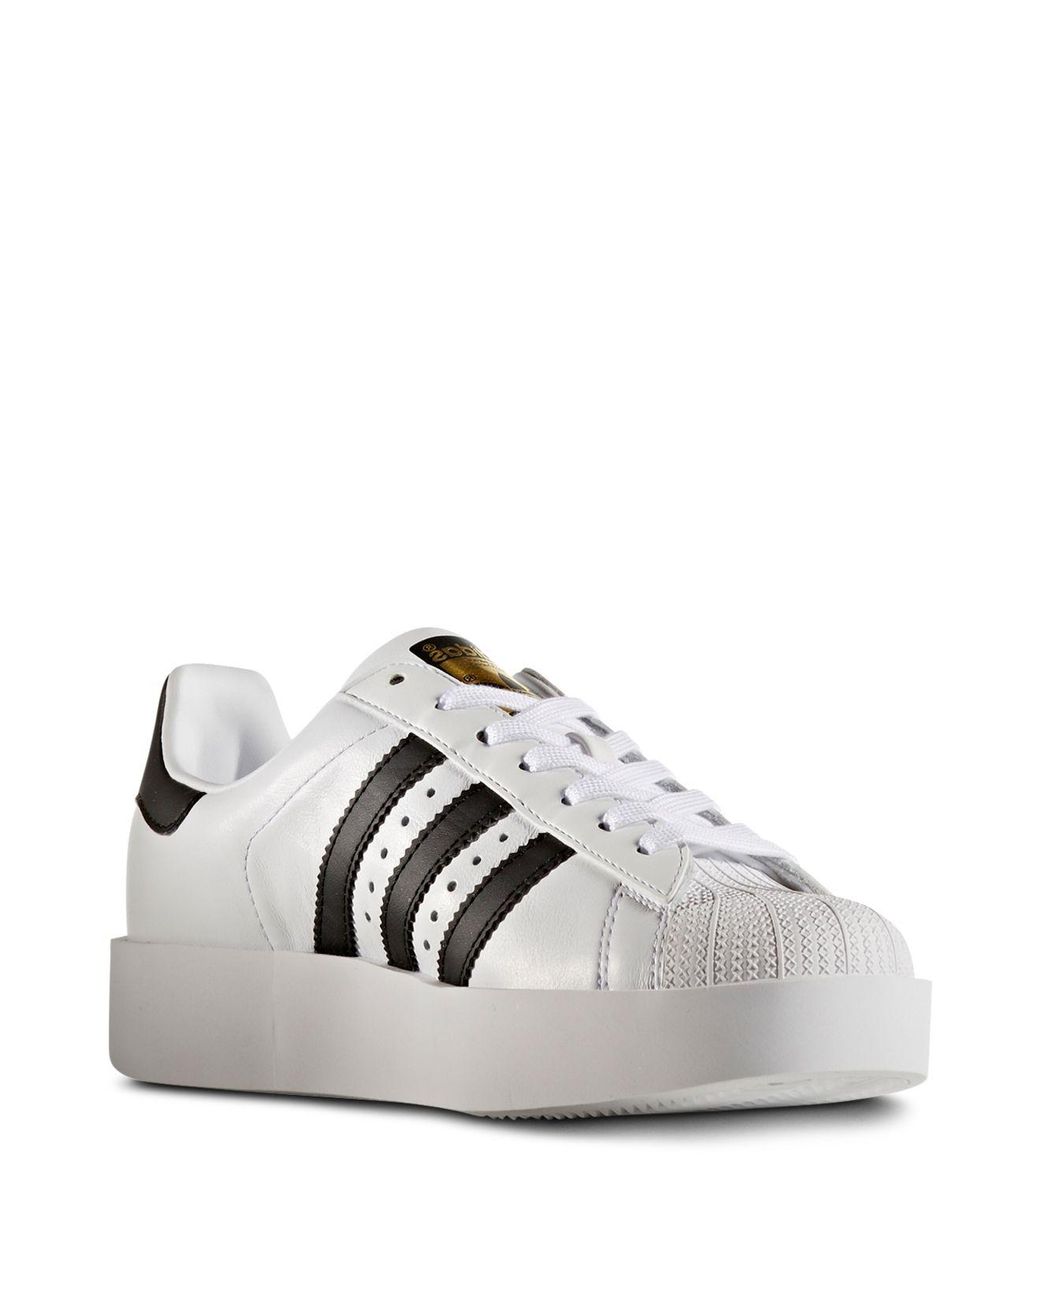 adidas Women's Superstar Bold Platform Lace Up Sneakers in White/Black  (White) | Lyst